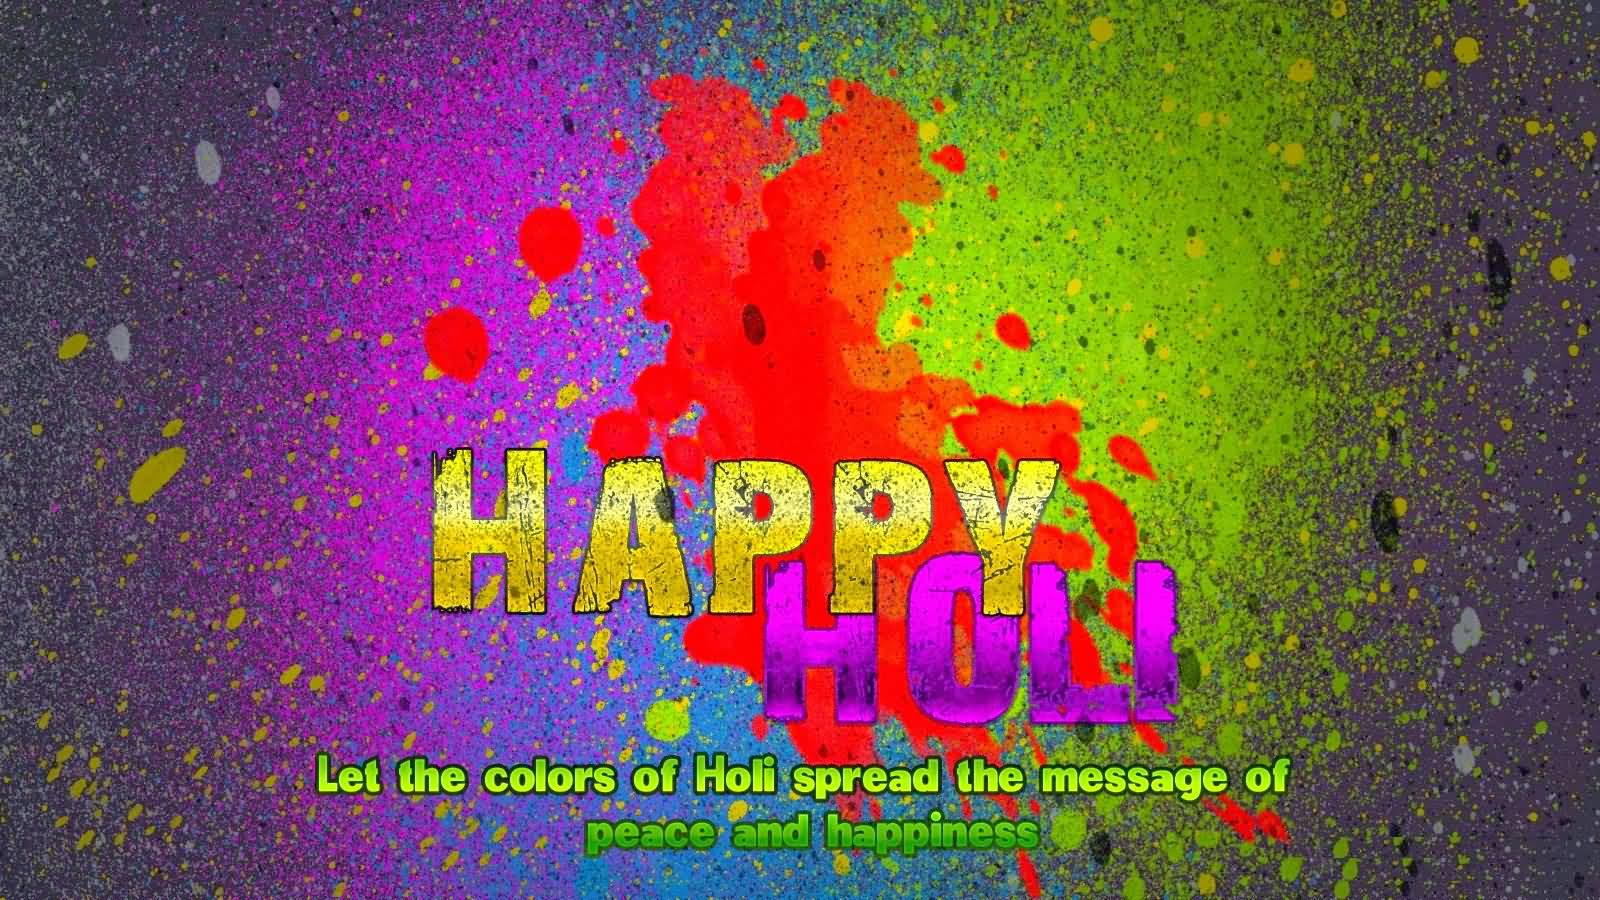 Happy Holi 2017 Let The Colors Of Holi Spread The Message Of Peace And Happiness